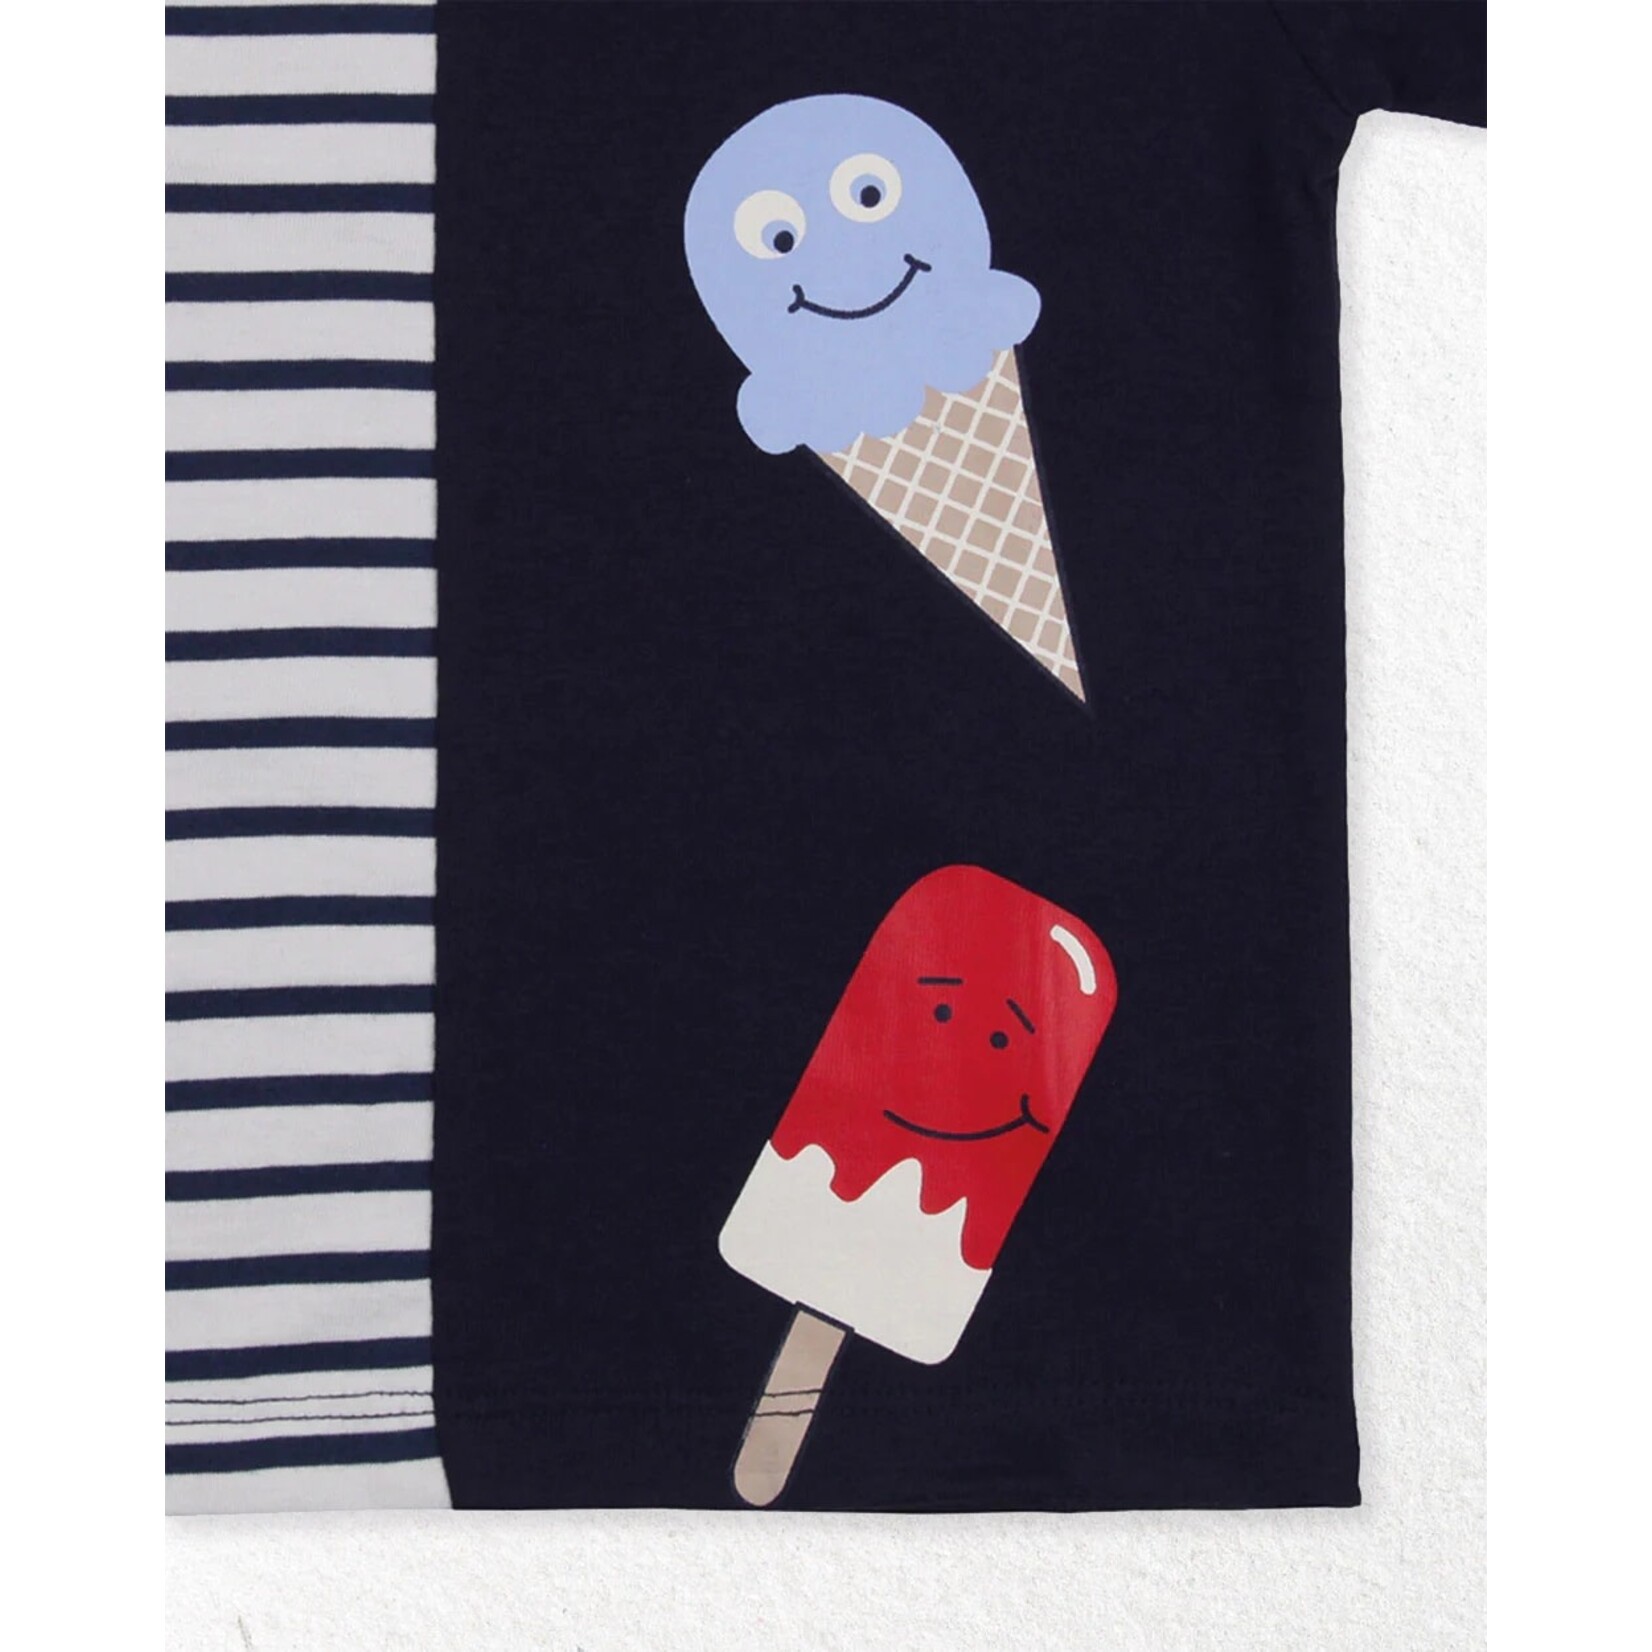 Lilly+Sid LILLY+SID - Striped Short Sleeve T-shirt with Happy Ice Cream Print